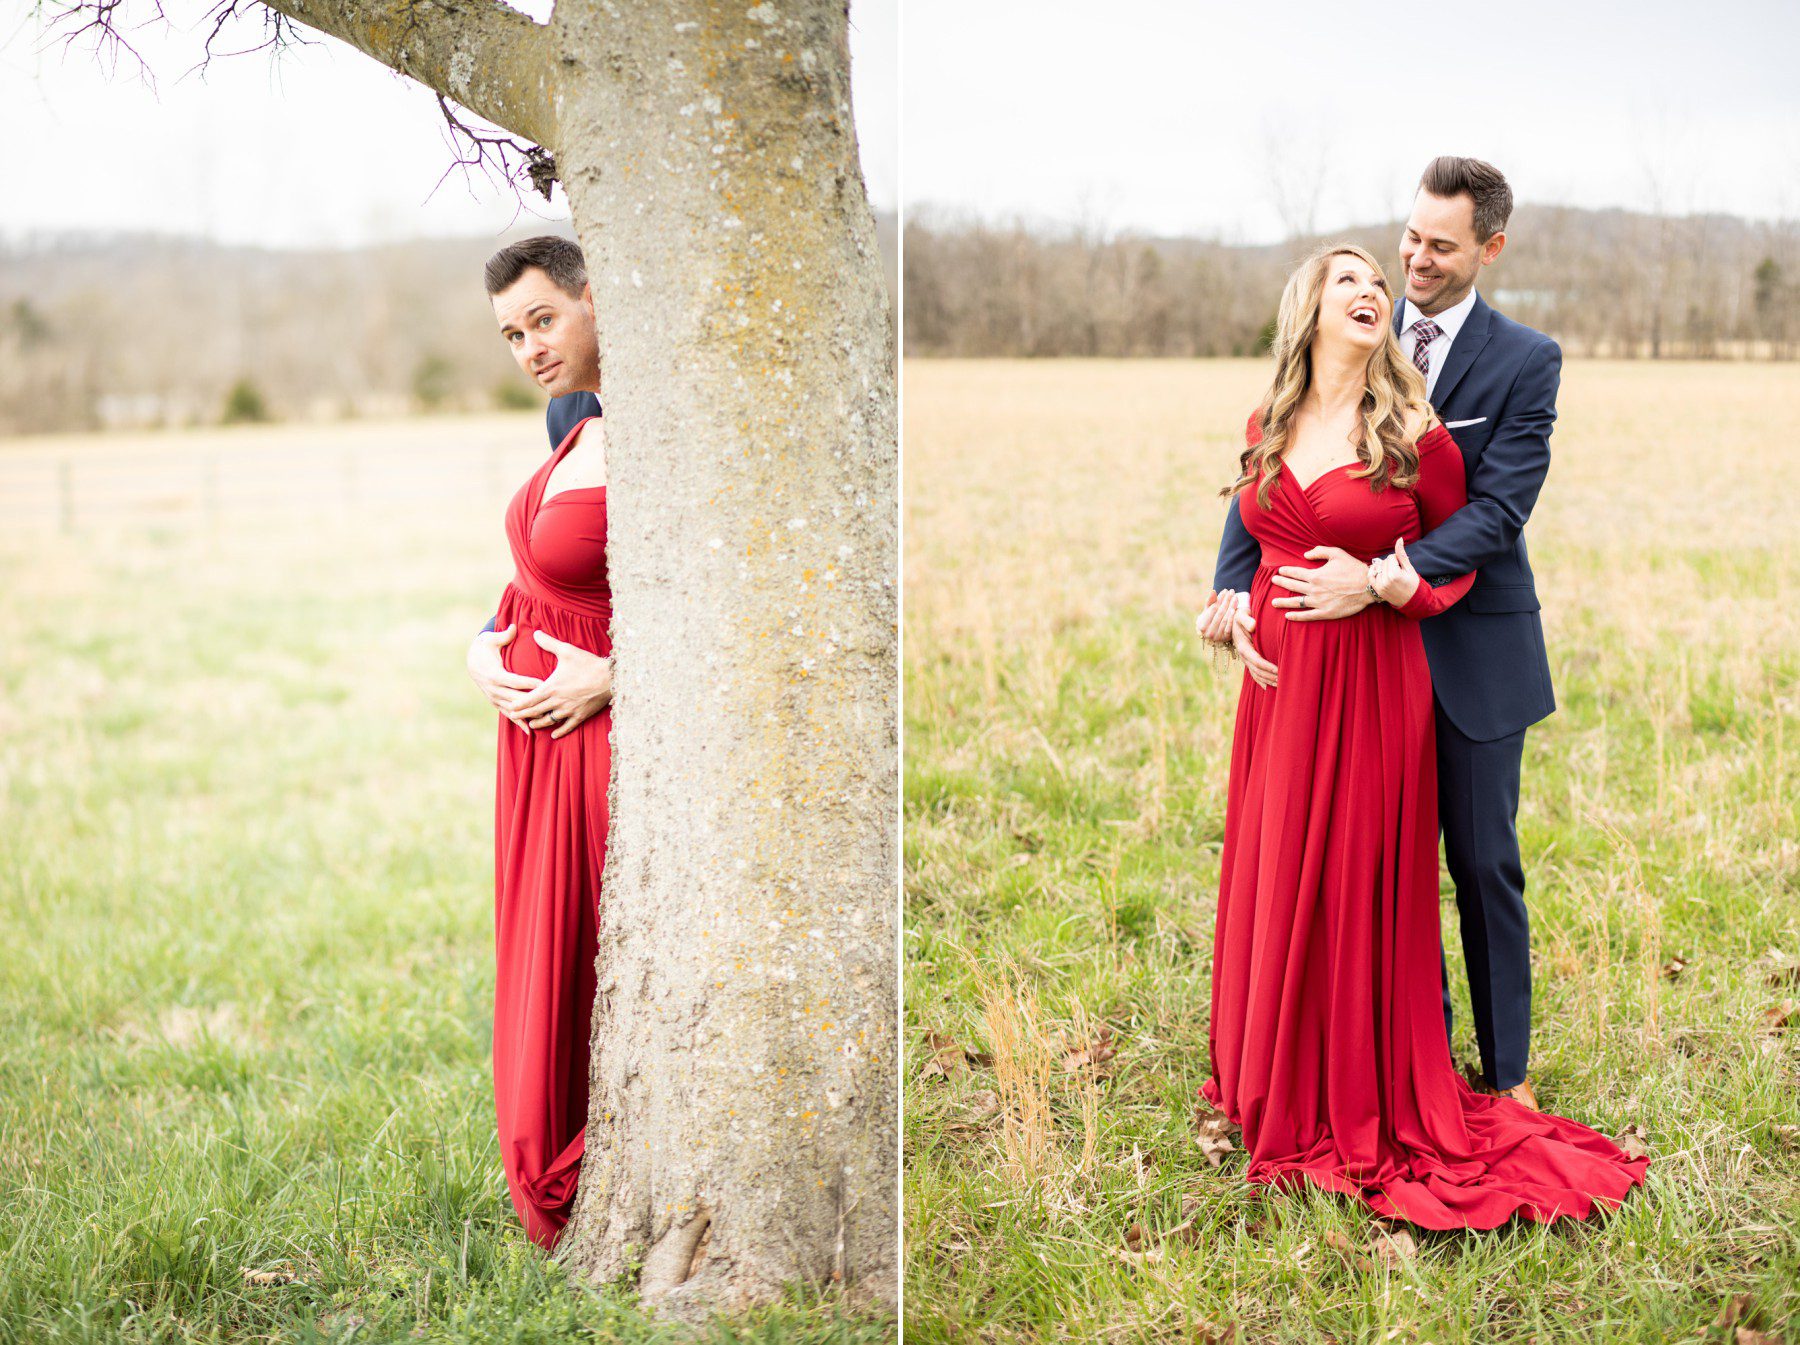 Funny outtakes Maternity shoot in field with long red gown 